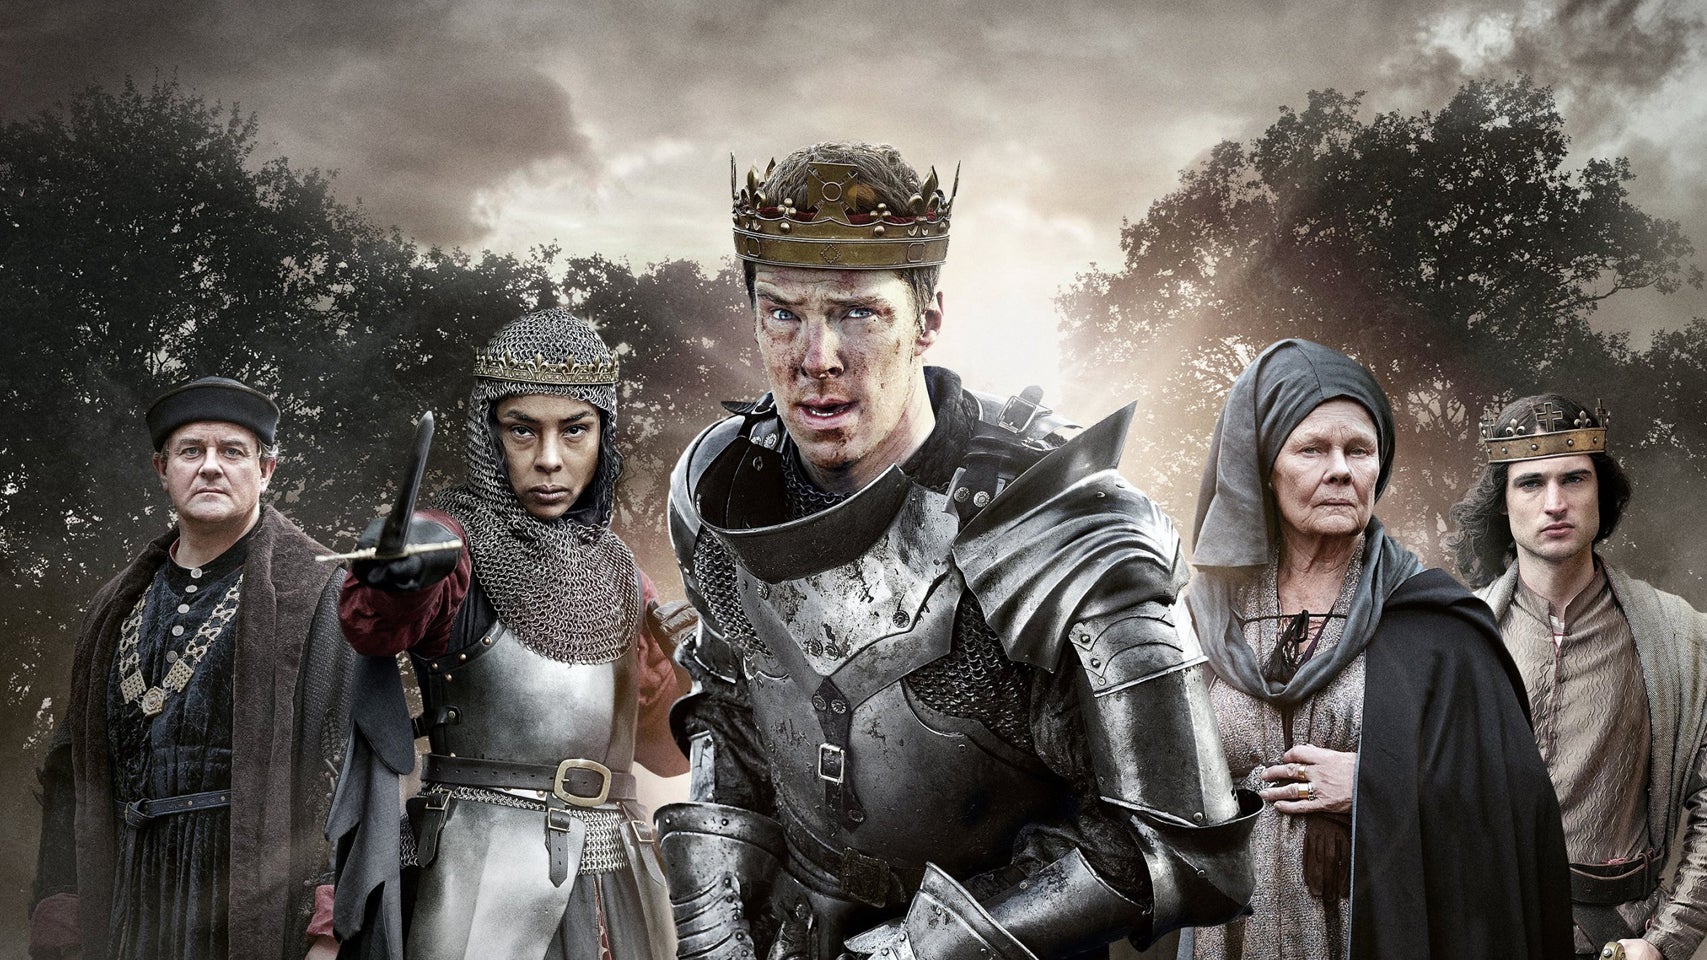 The cast of The Hollow Crown